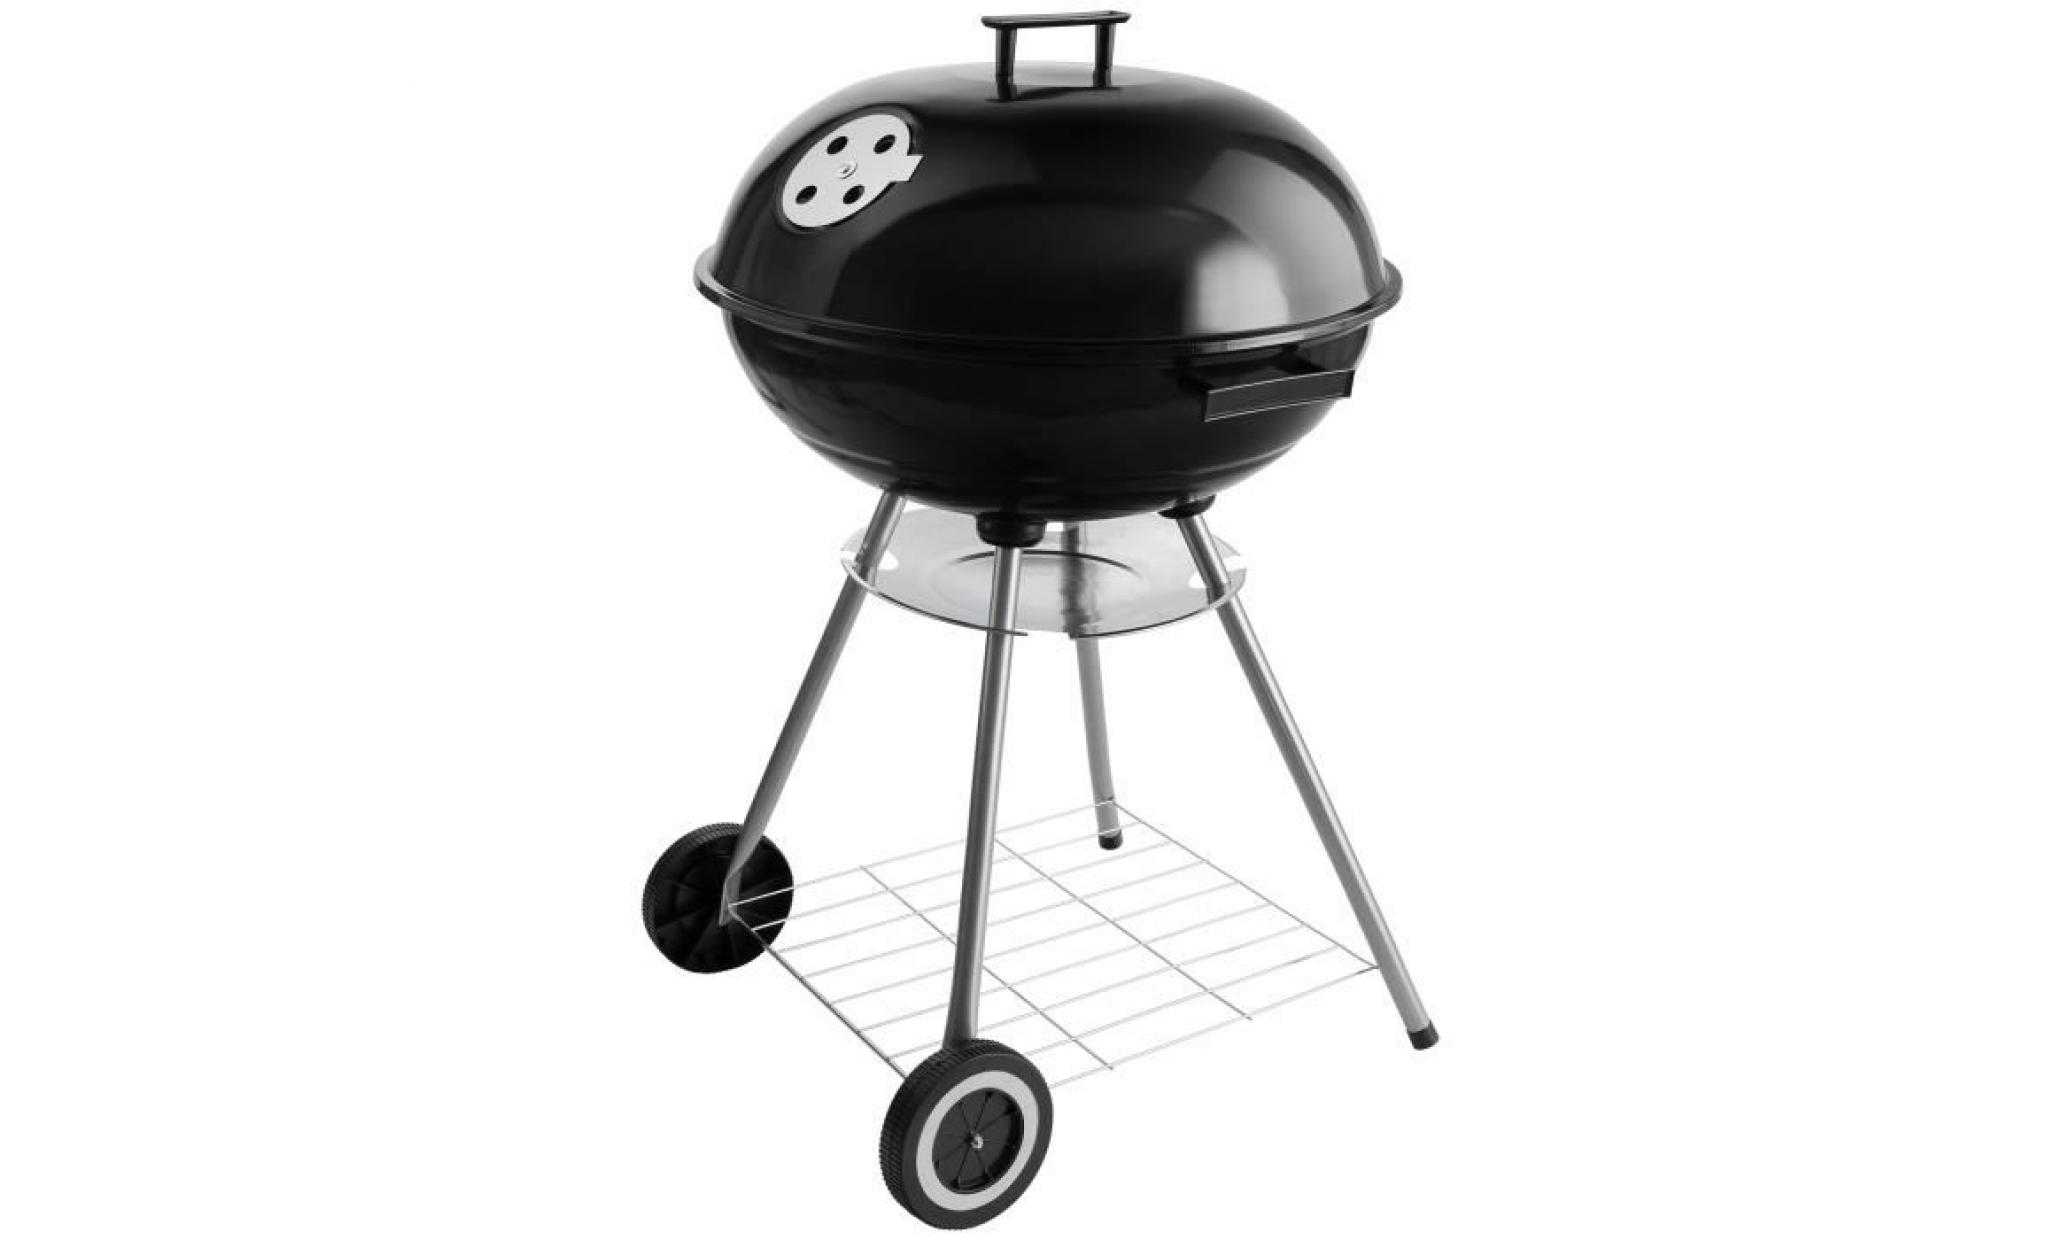 arebos barbecue boule barbecue grille bbq rond mobile acier inoxydable 57 cm pas cher